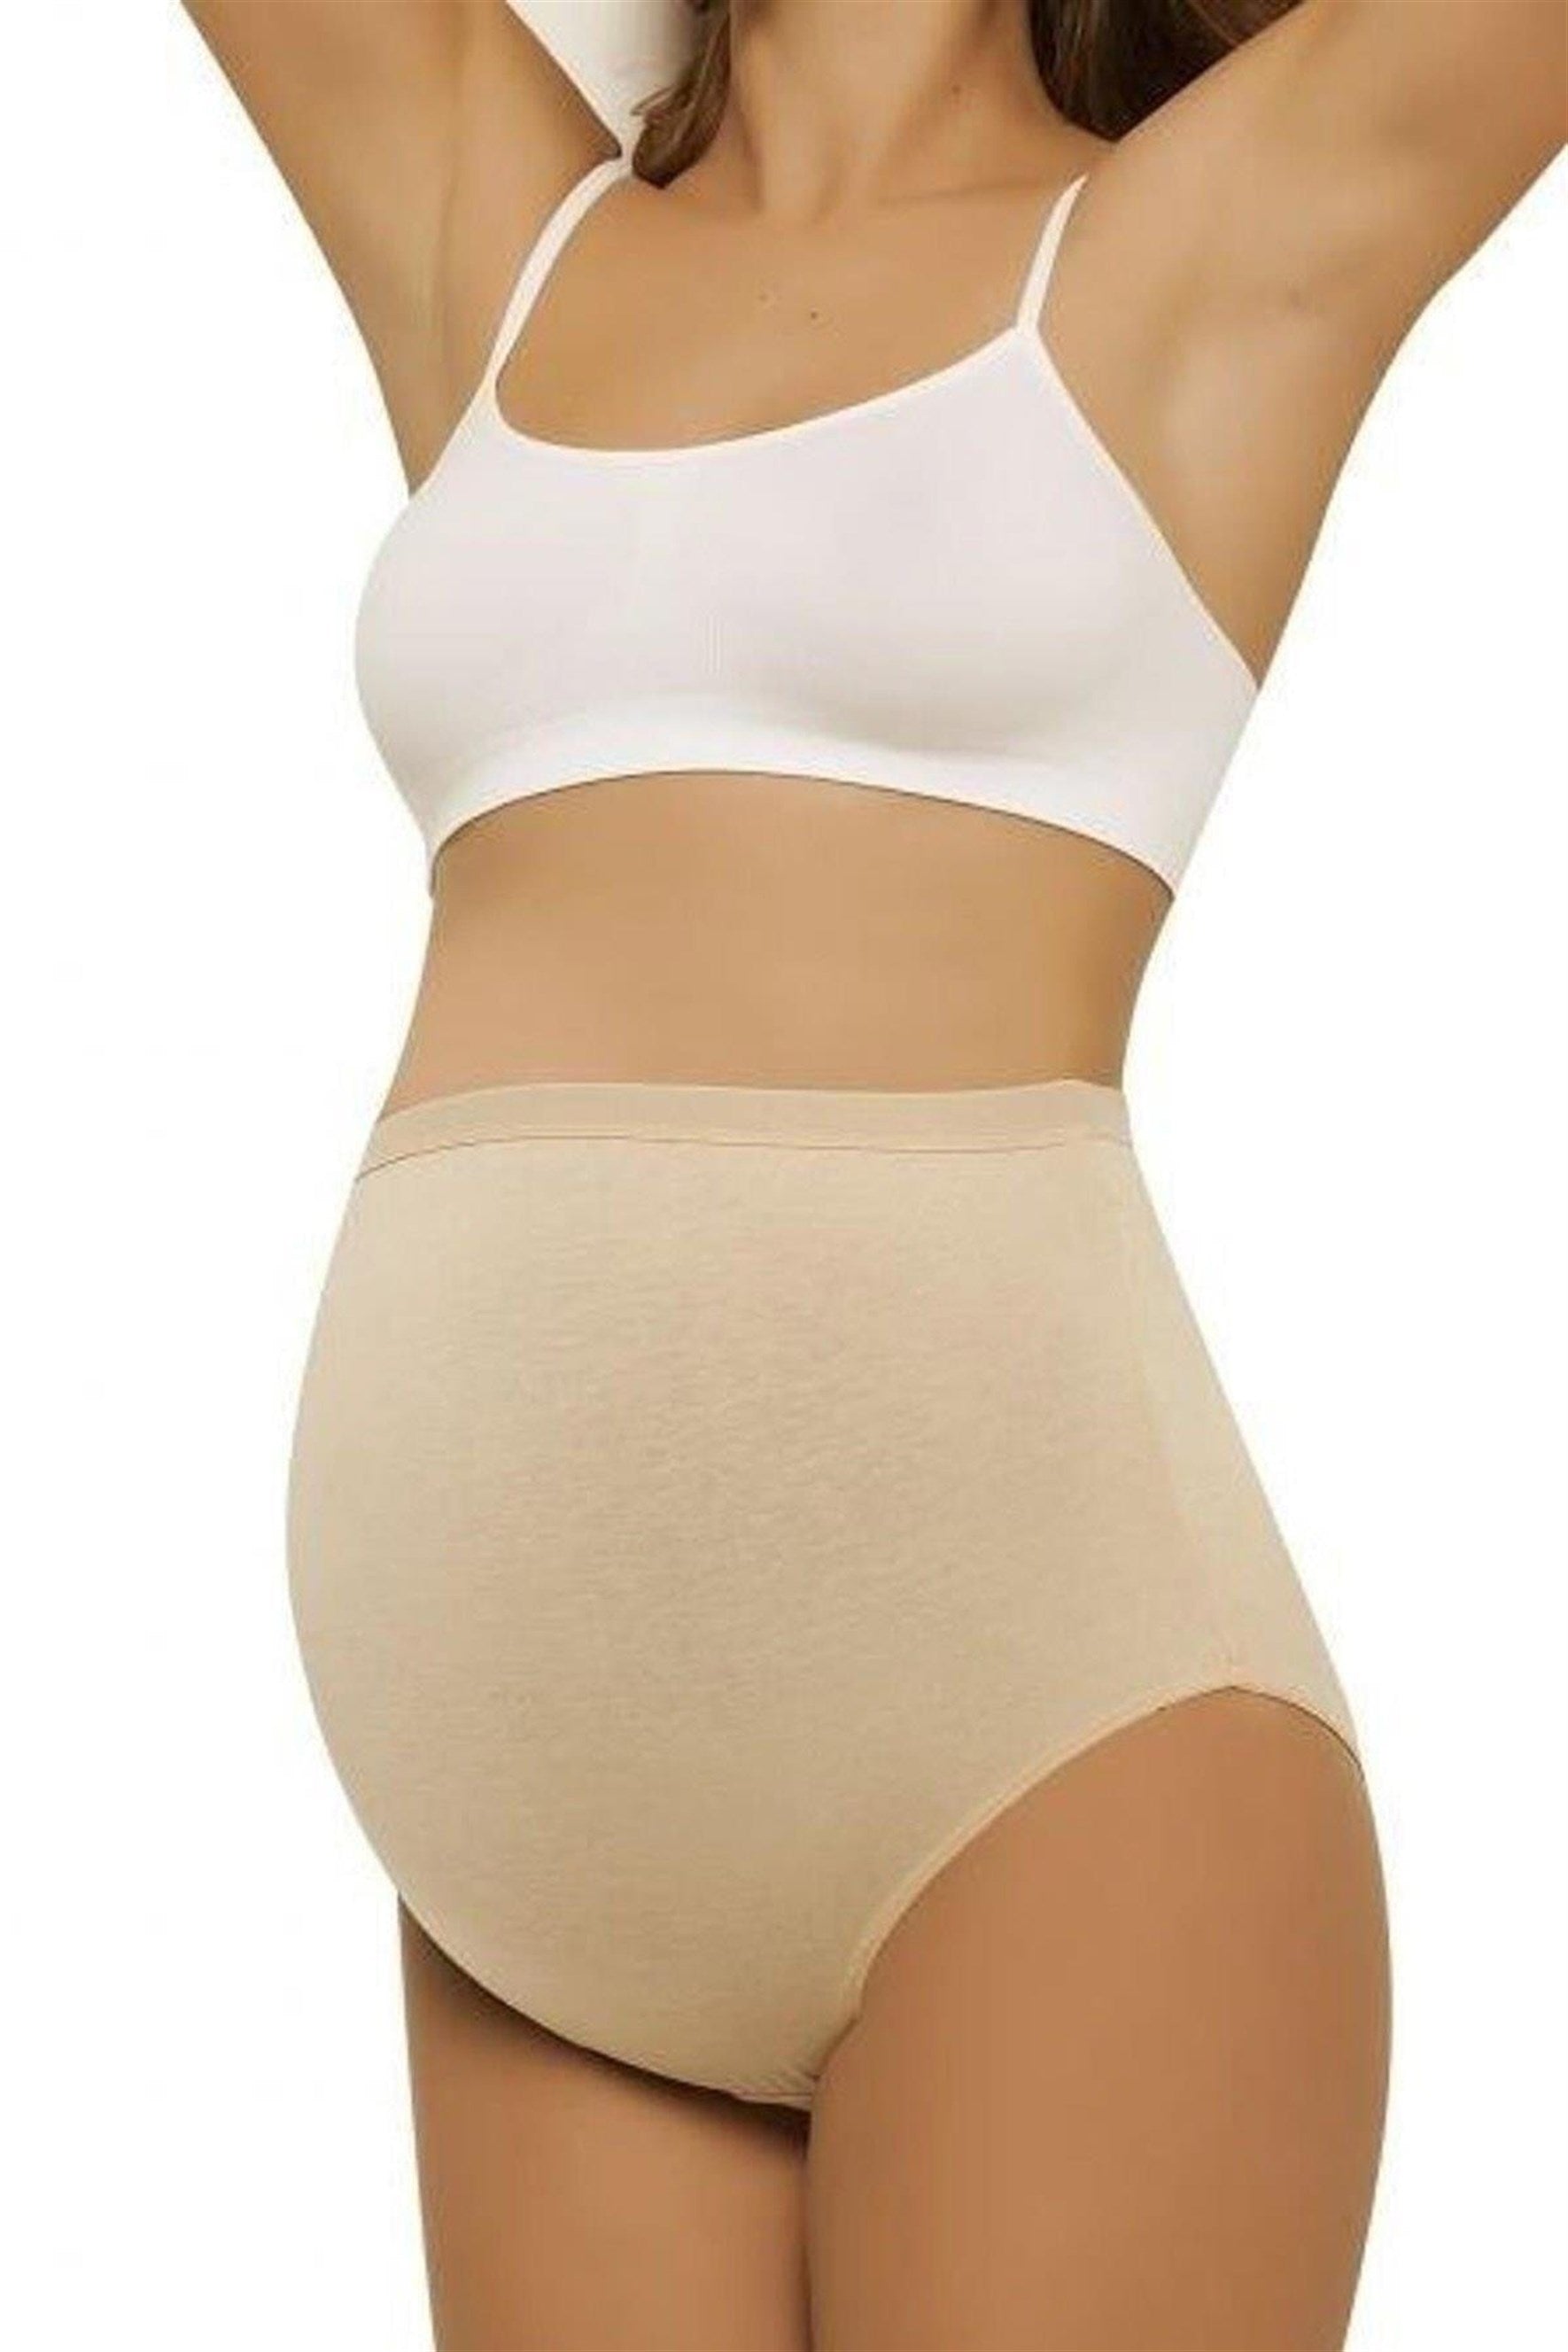 Shopymommy - 2-Pack Cotton Maternity Panties Skin - 540